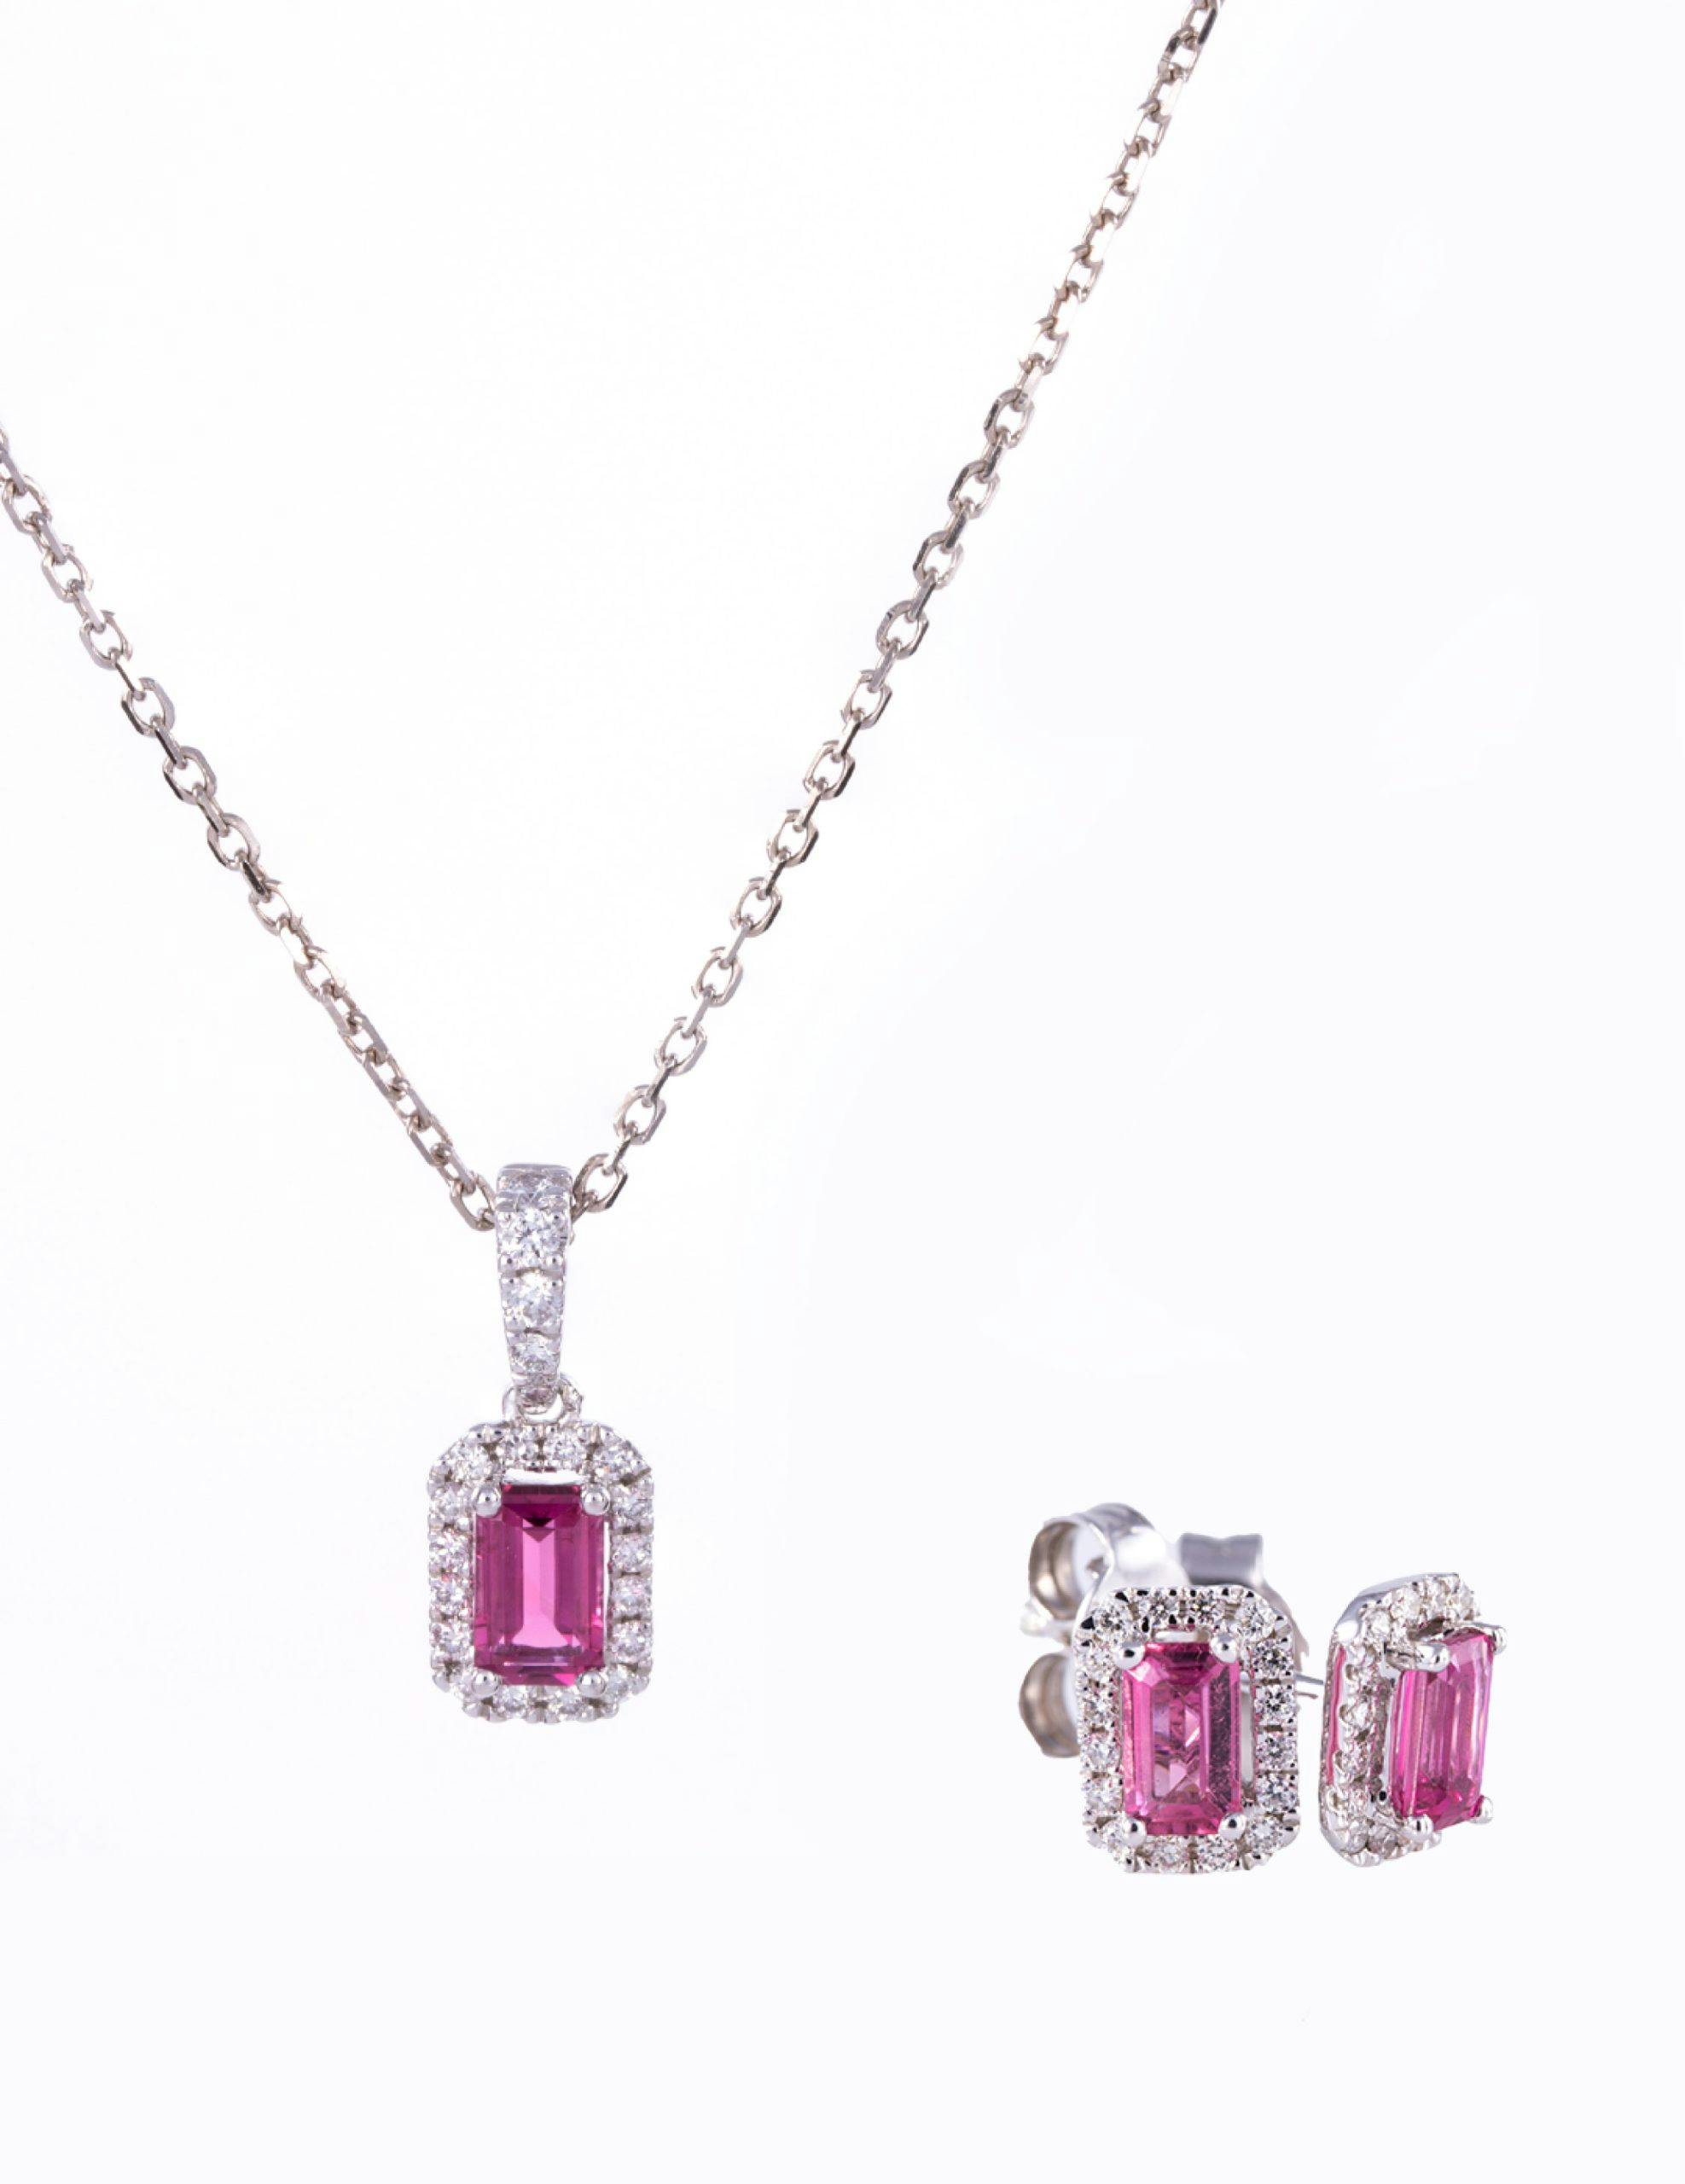 Pink Tourmaline and Diamond Necklace and Earrings